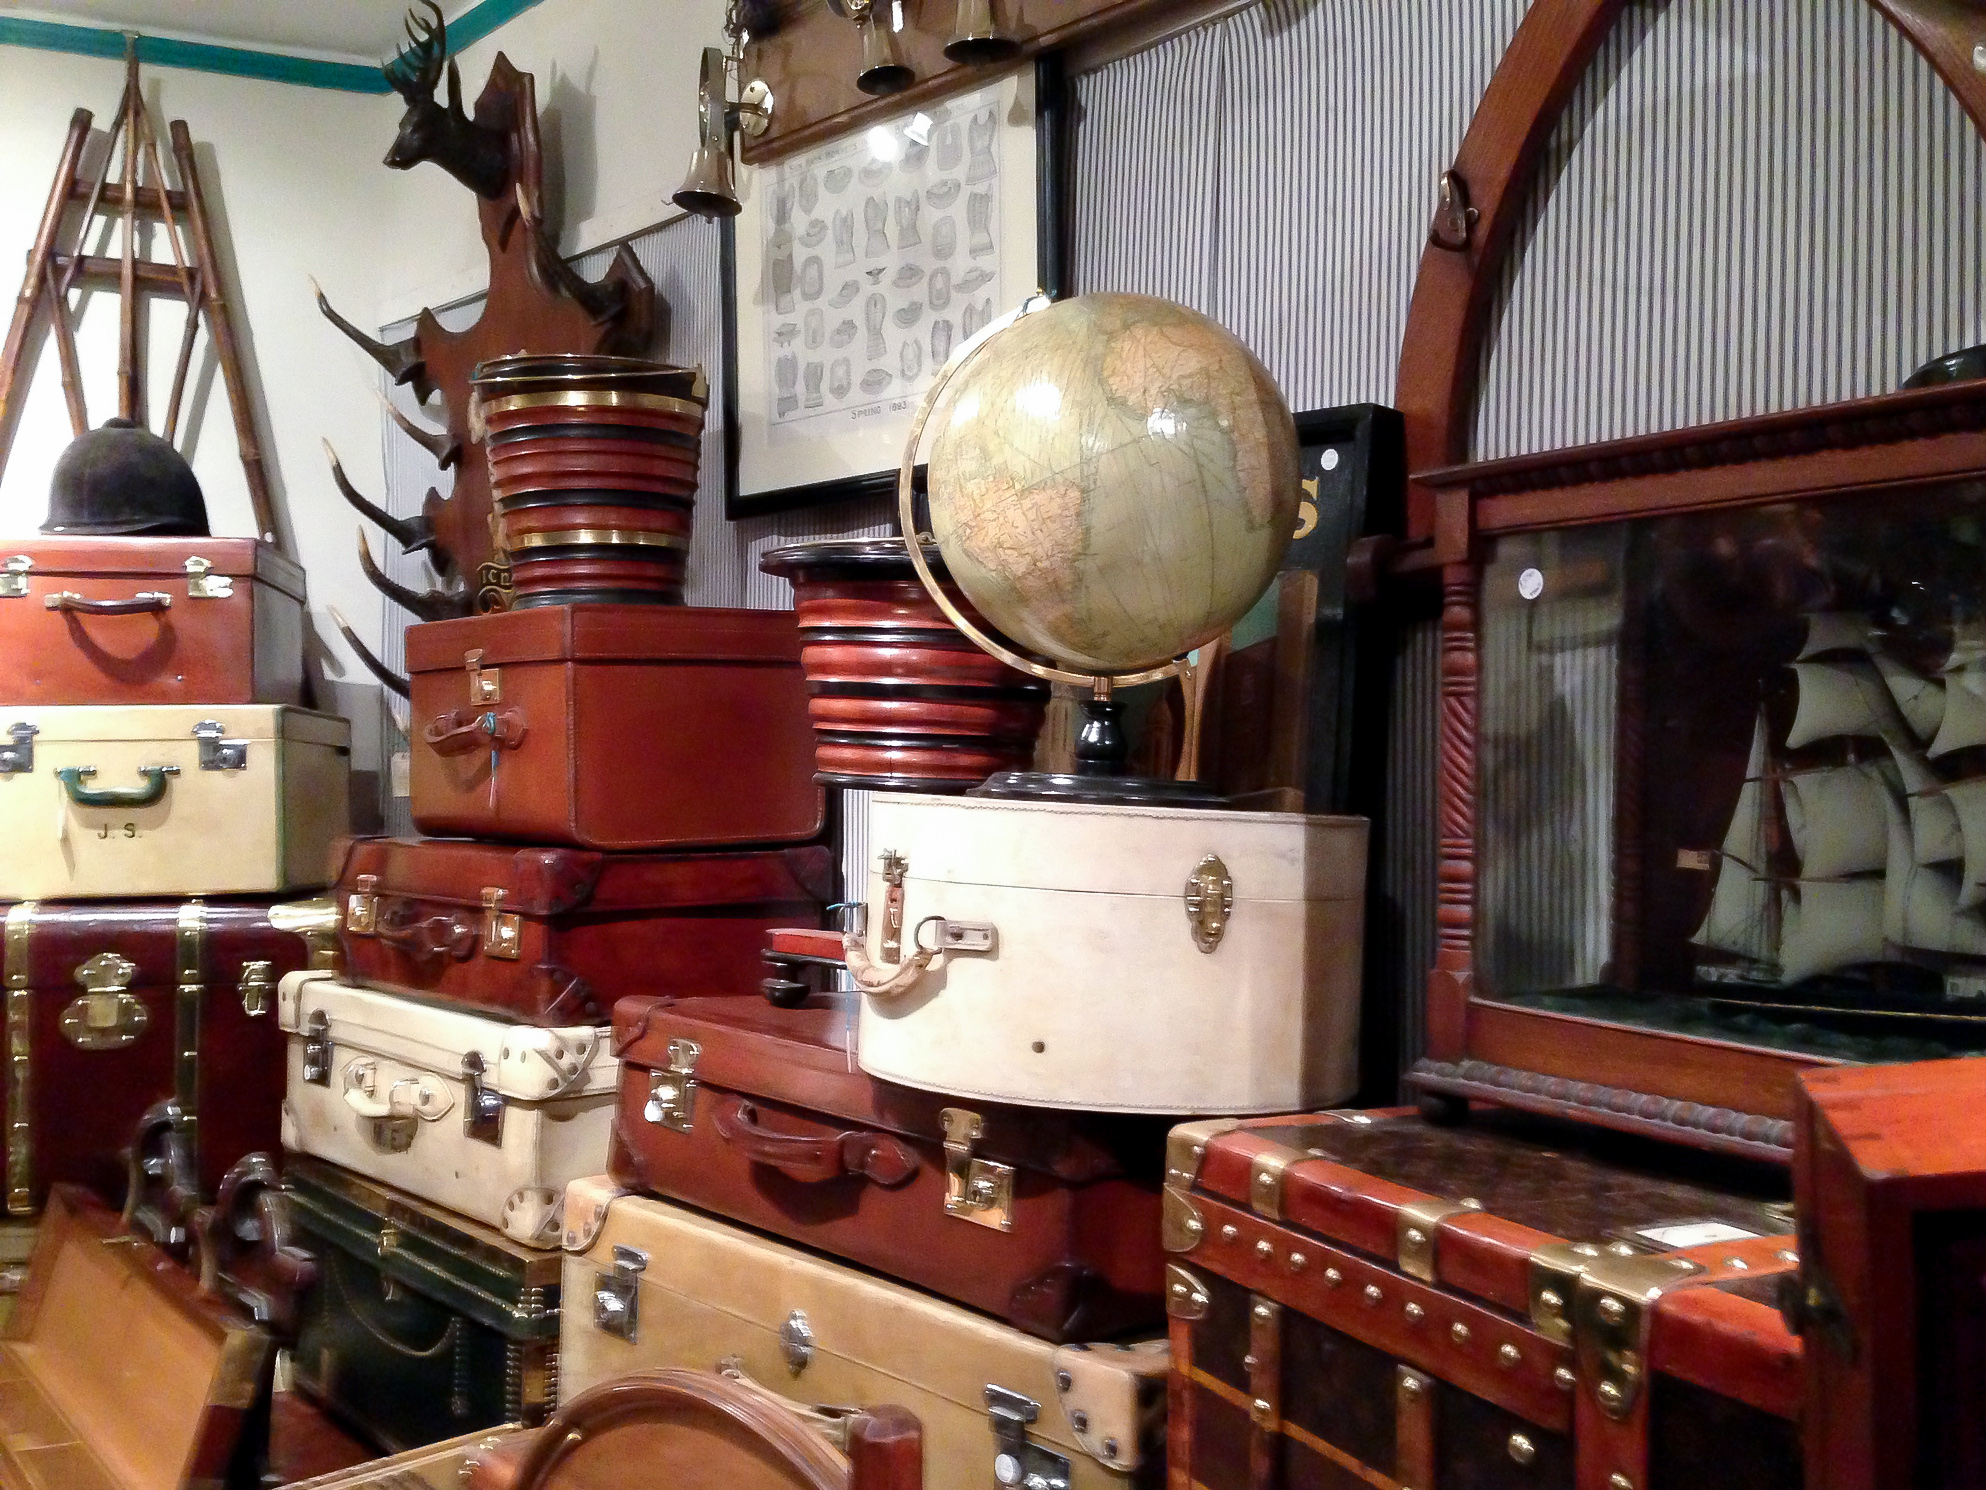 Vintage and antique globes and suitcases at Henry Gregory in London. Photo by alphacityguides.